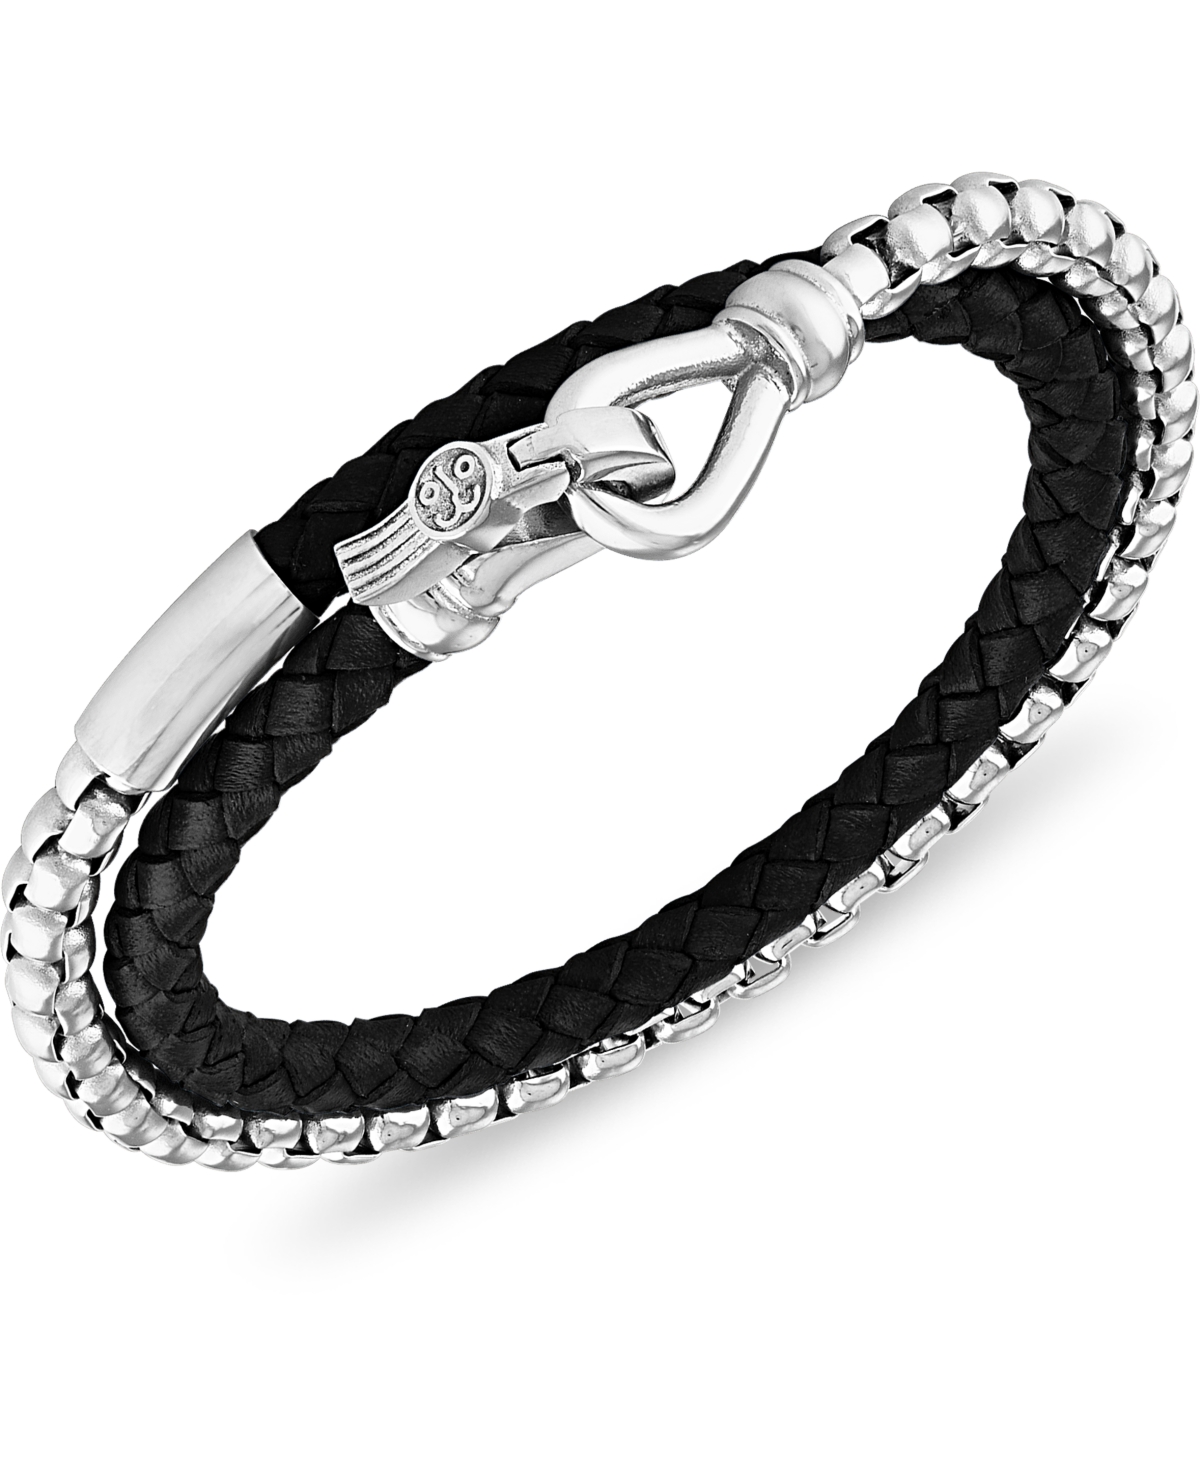 Black Leather Double Wrap Bracelet in Stainless Steel (also in Brown Leather), Created for Macy's - Black